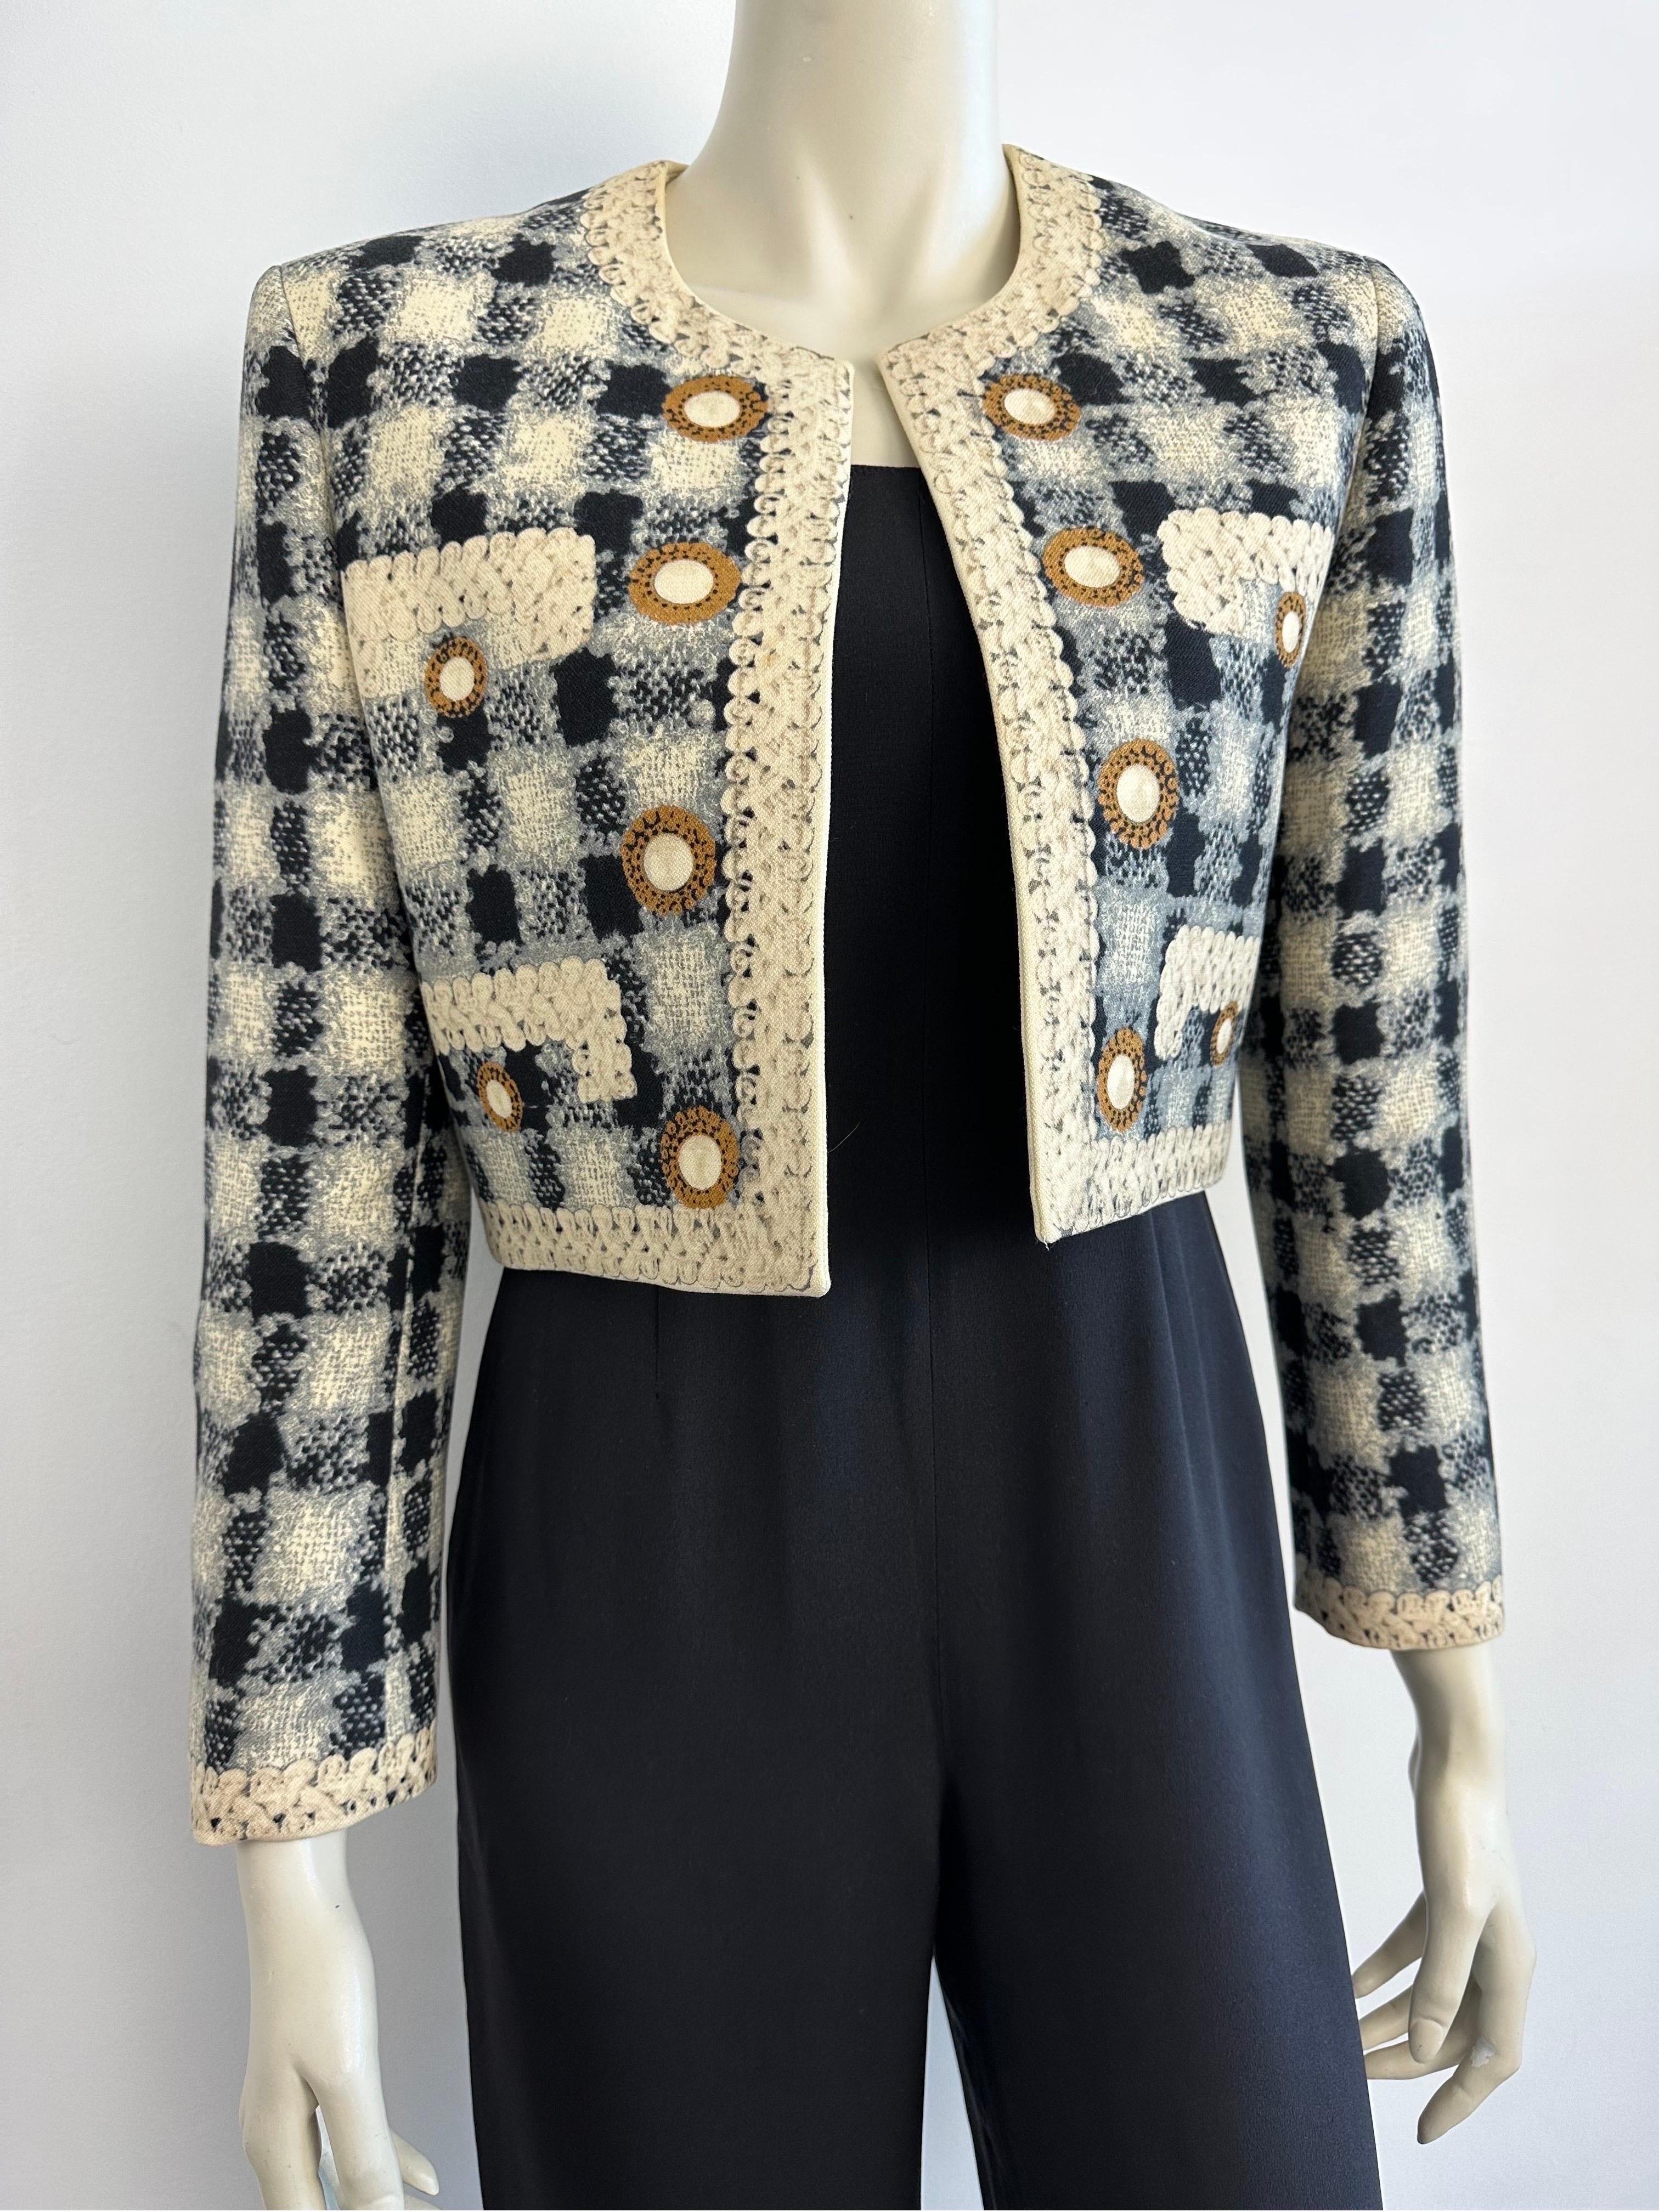 Moschino Couture tweed jacket with imposing gold buttons adorned with pearls and multiple pockets, all beautifully printed on an open jacket with a short cut and rounded neckline.
Fully lined wool jacket.
Made in Italy.
Size 40FR, please refer to